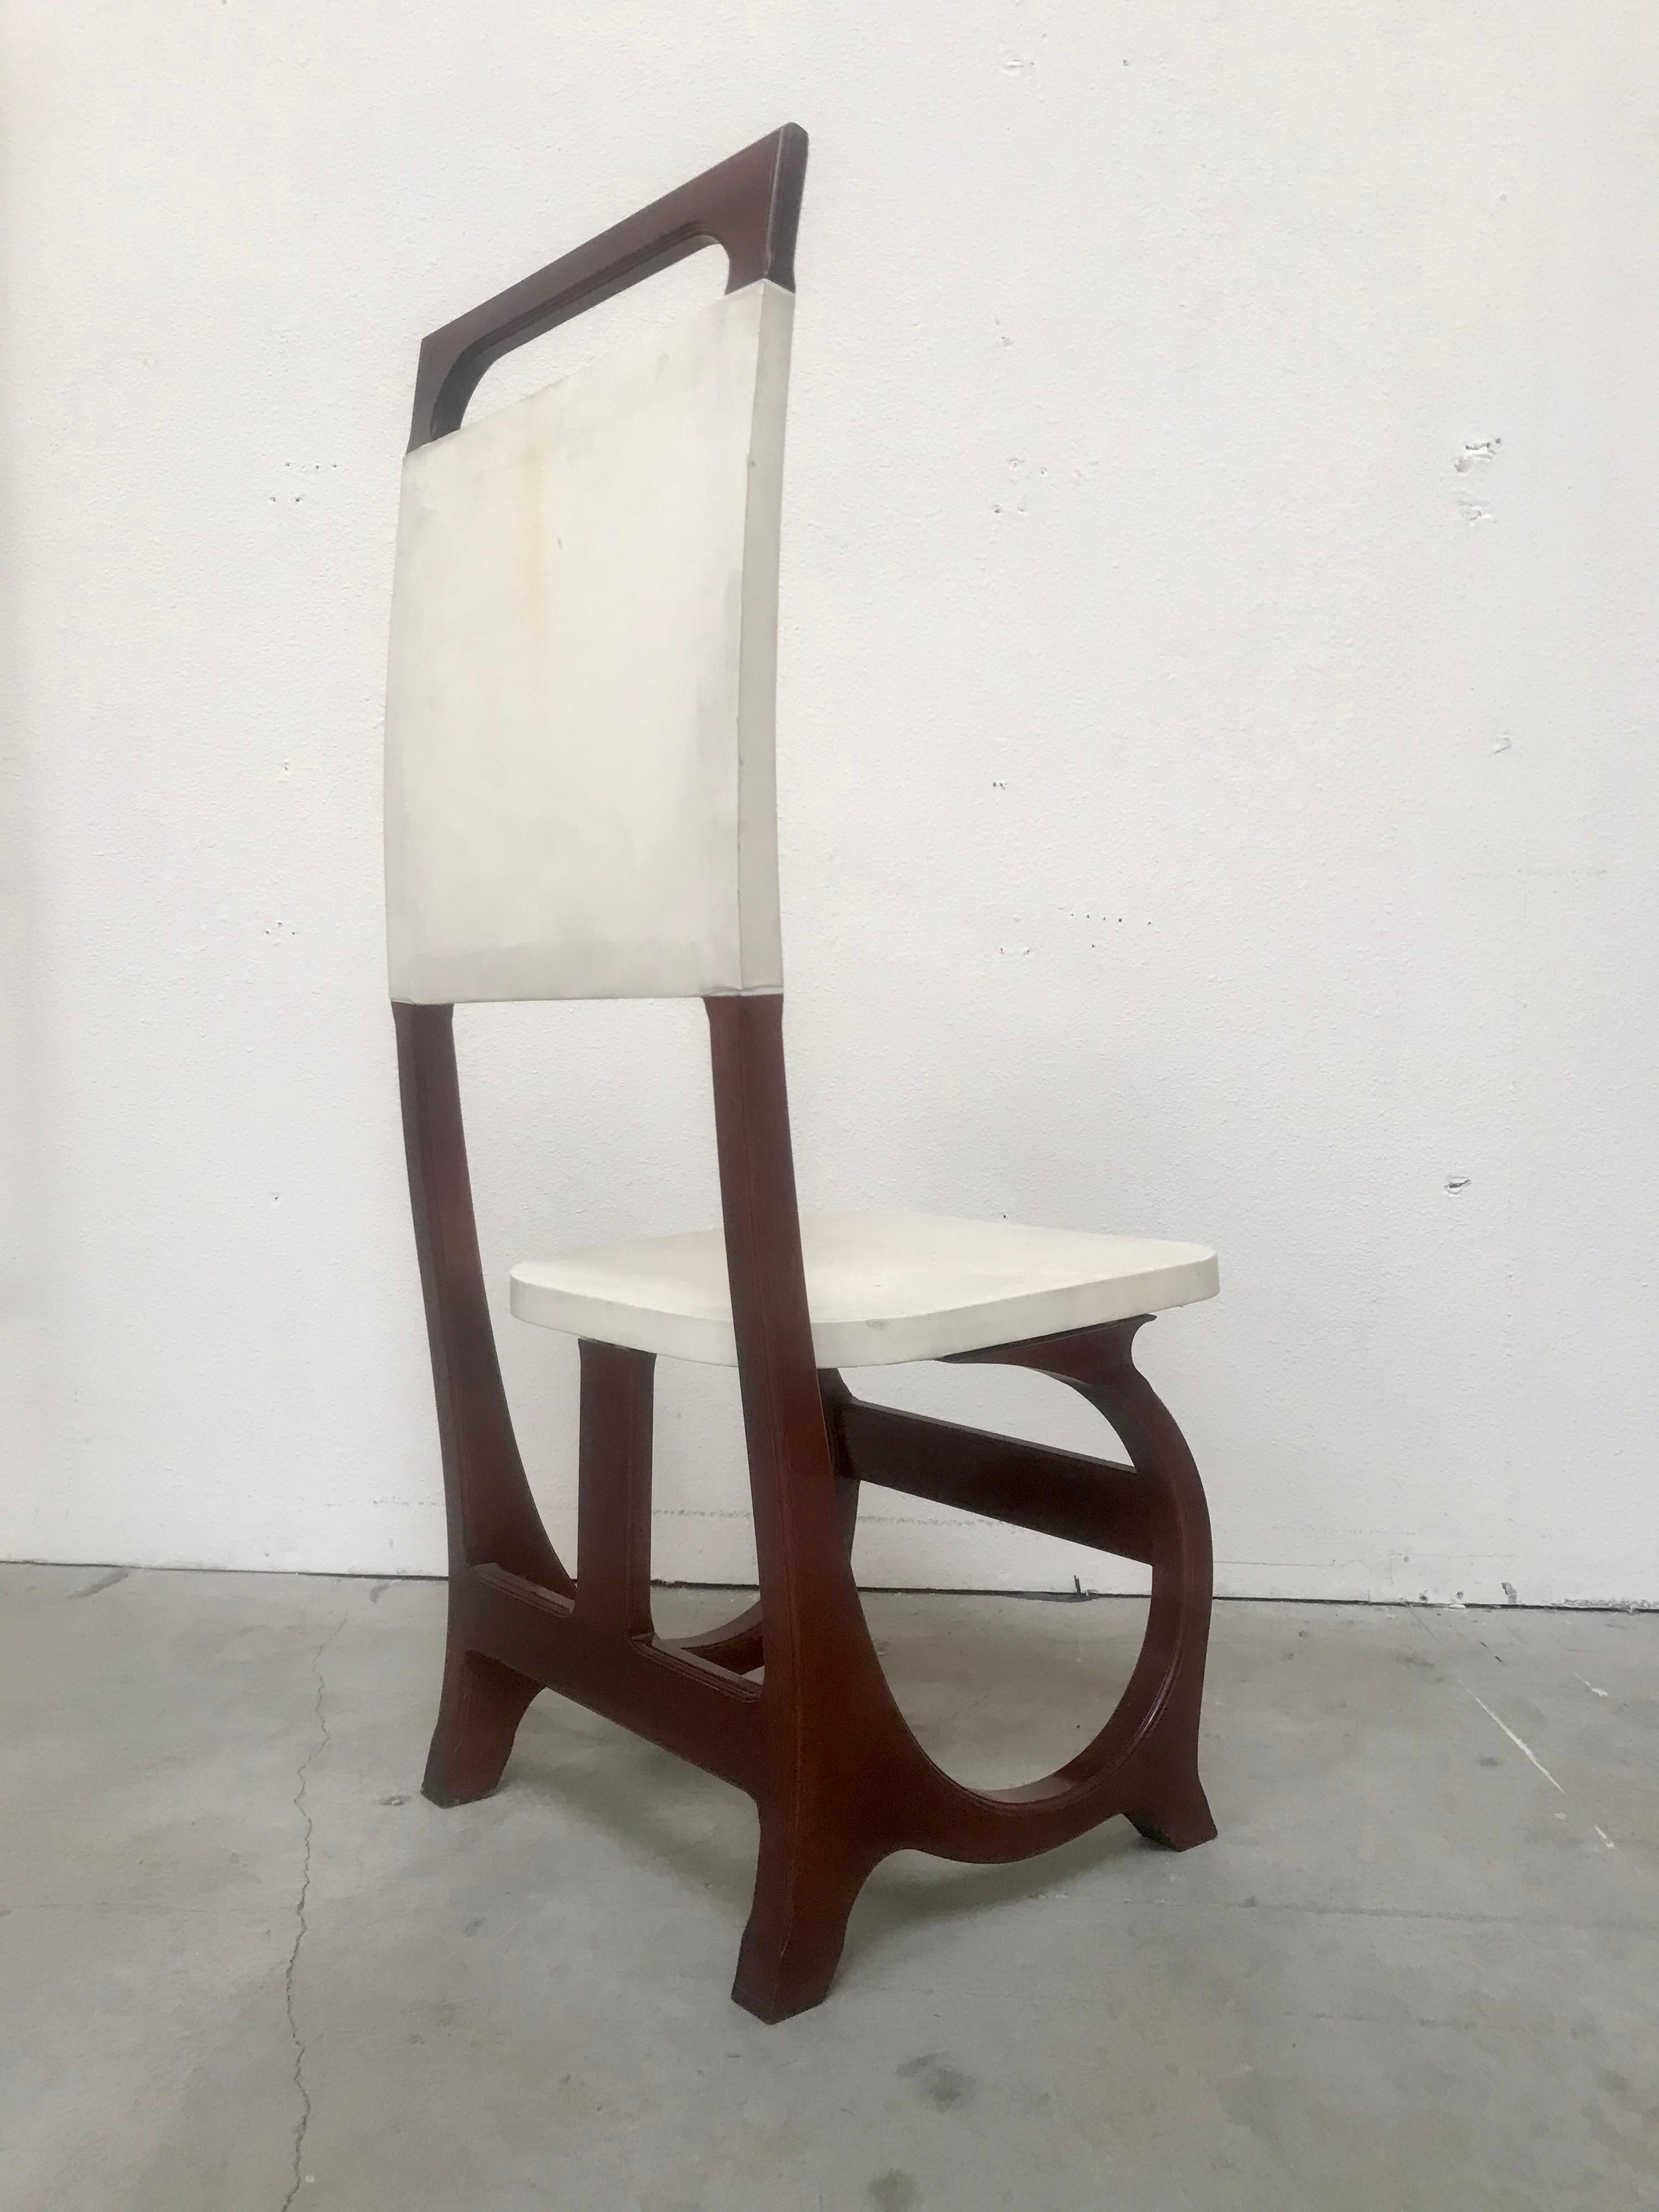 Nice accent chair for any interior
Italian rosewood construction with parchment / leather seat and backrest
Original vintage condition showing minor ware / patina consistent with age
Solid and sturdy.
   